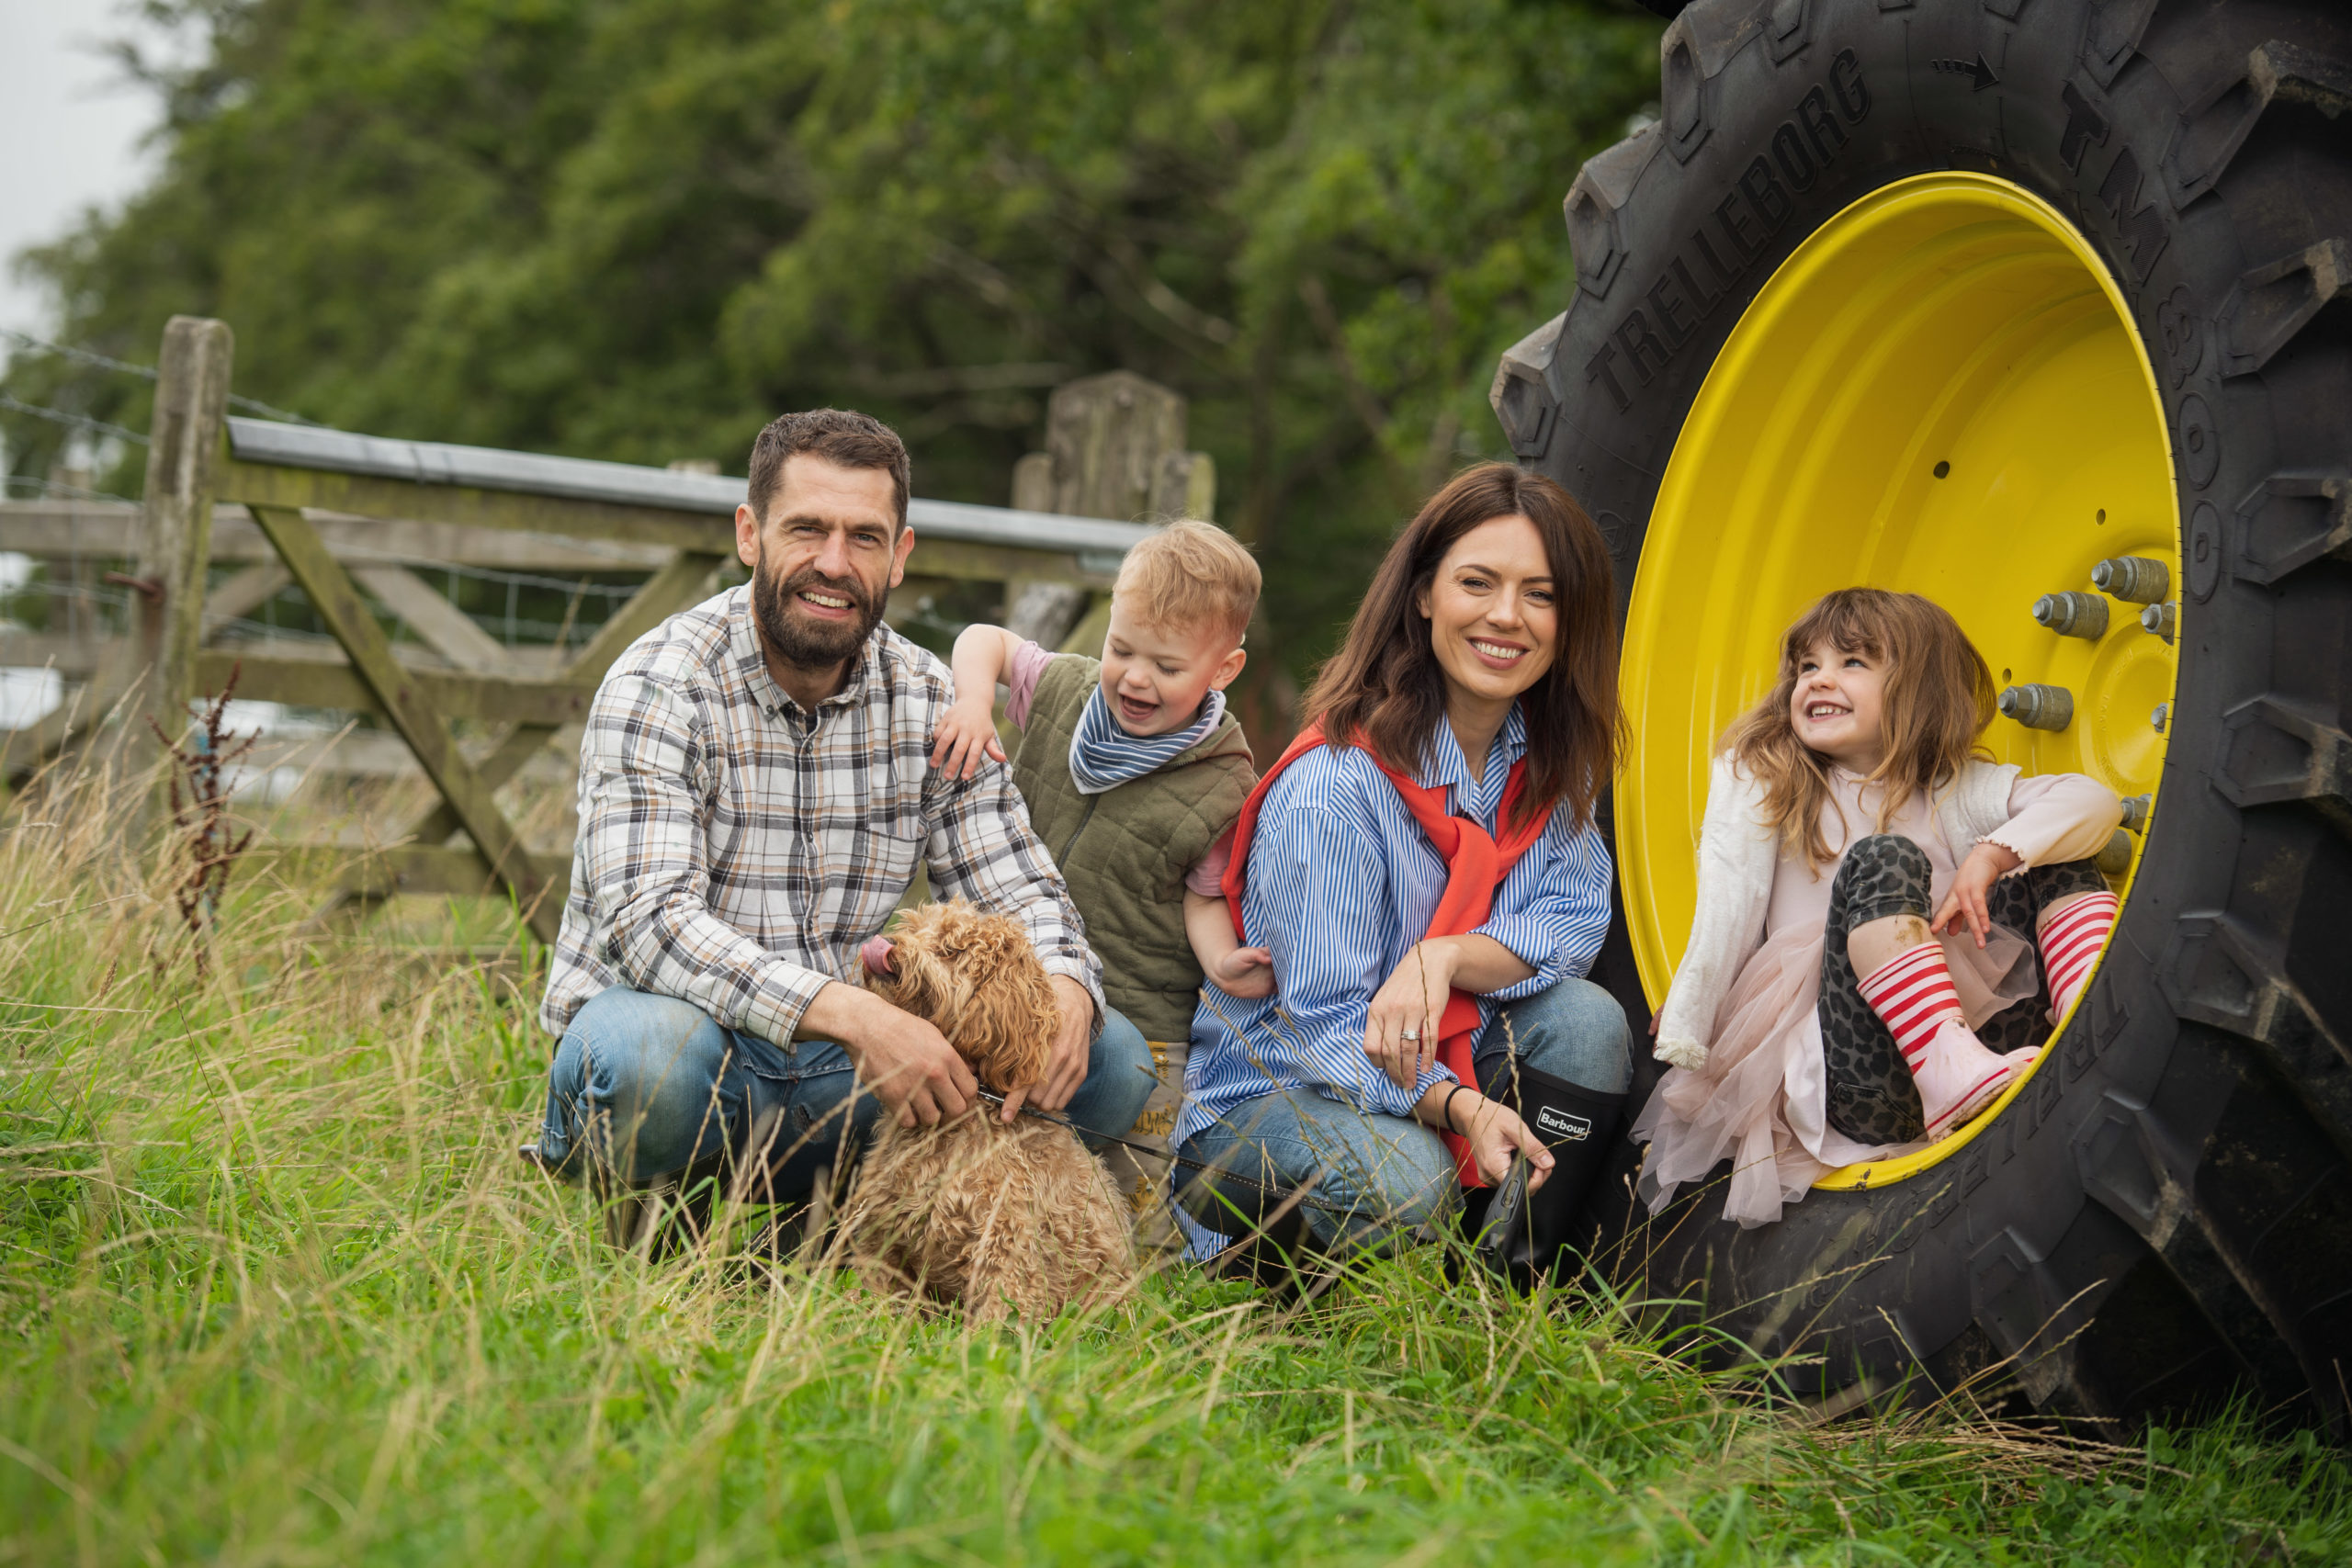 TV star Kelvin Fletcher and family in fiarm field with tractor for publicity photography